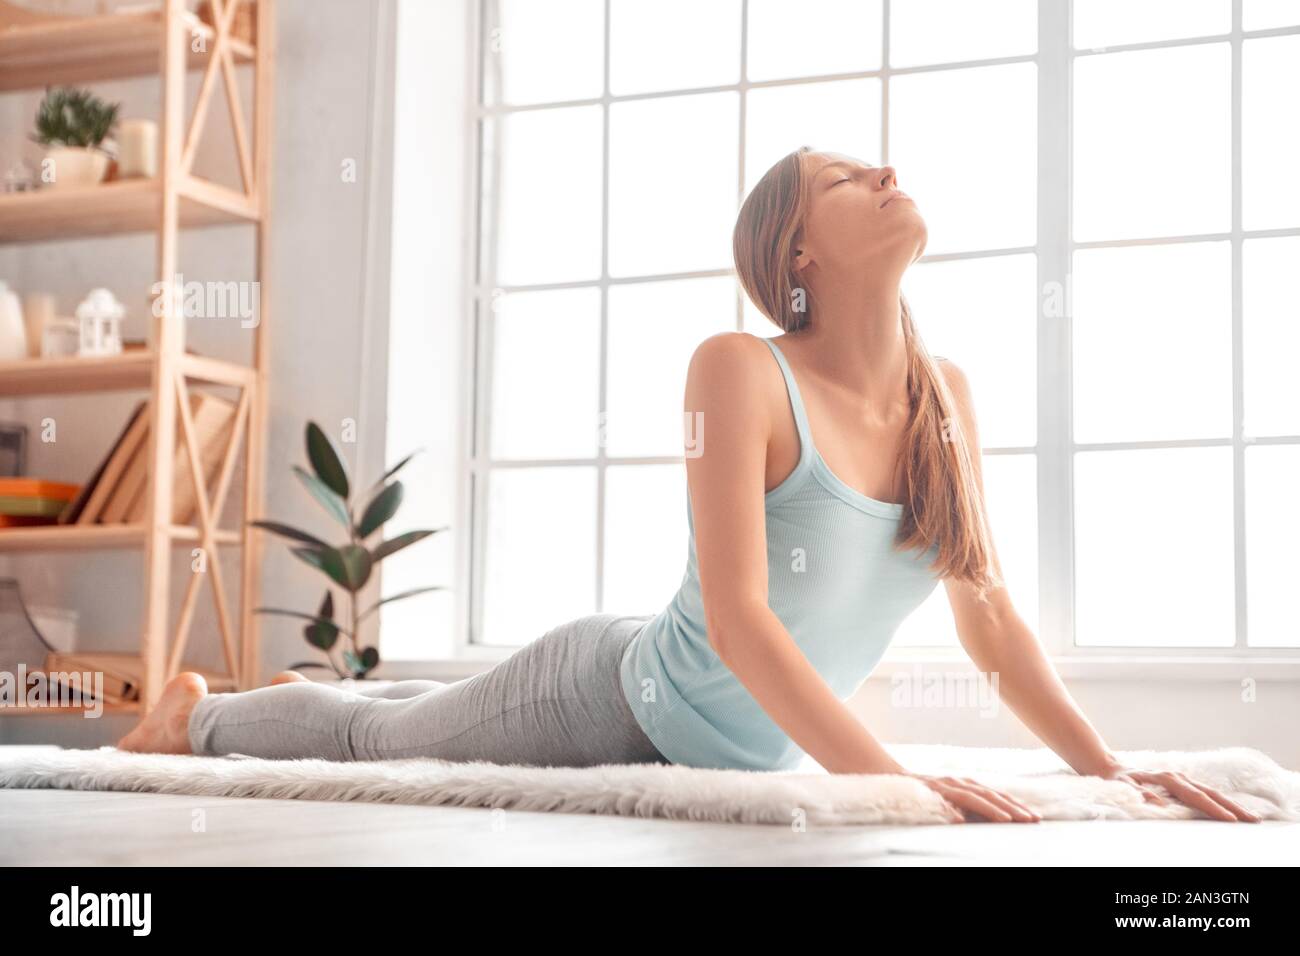 Weekend. Woman exercise at home on carpet stretching back peaceful Stock Photo